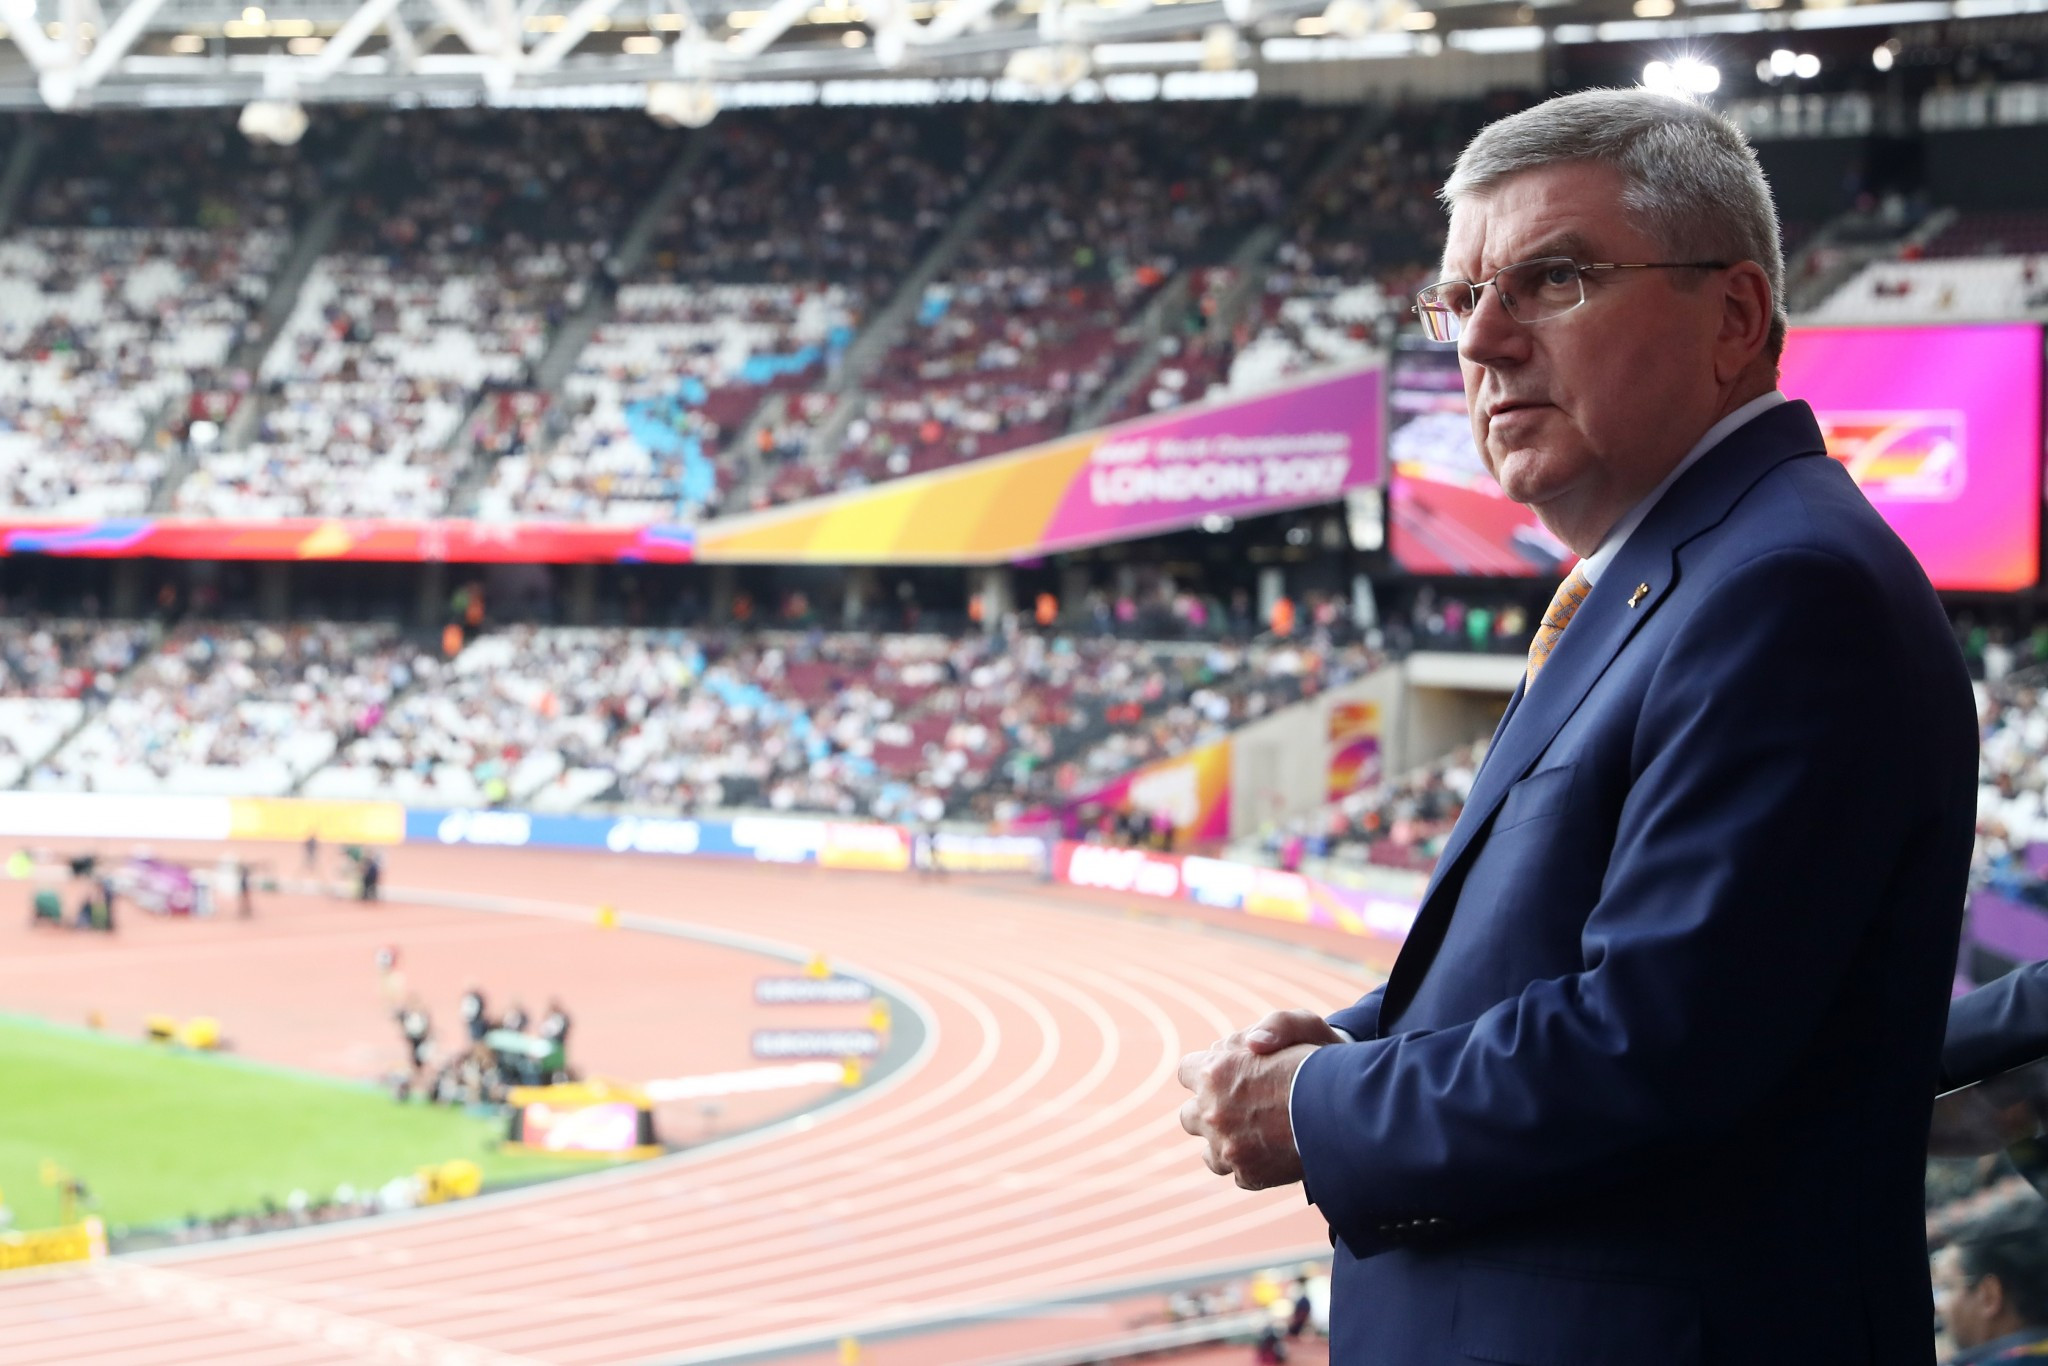 International Olympic Committee President Thomas Bach during a visit to the IAAF World Championships in London ©Getty Images